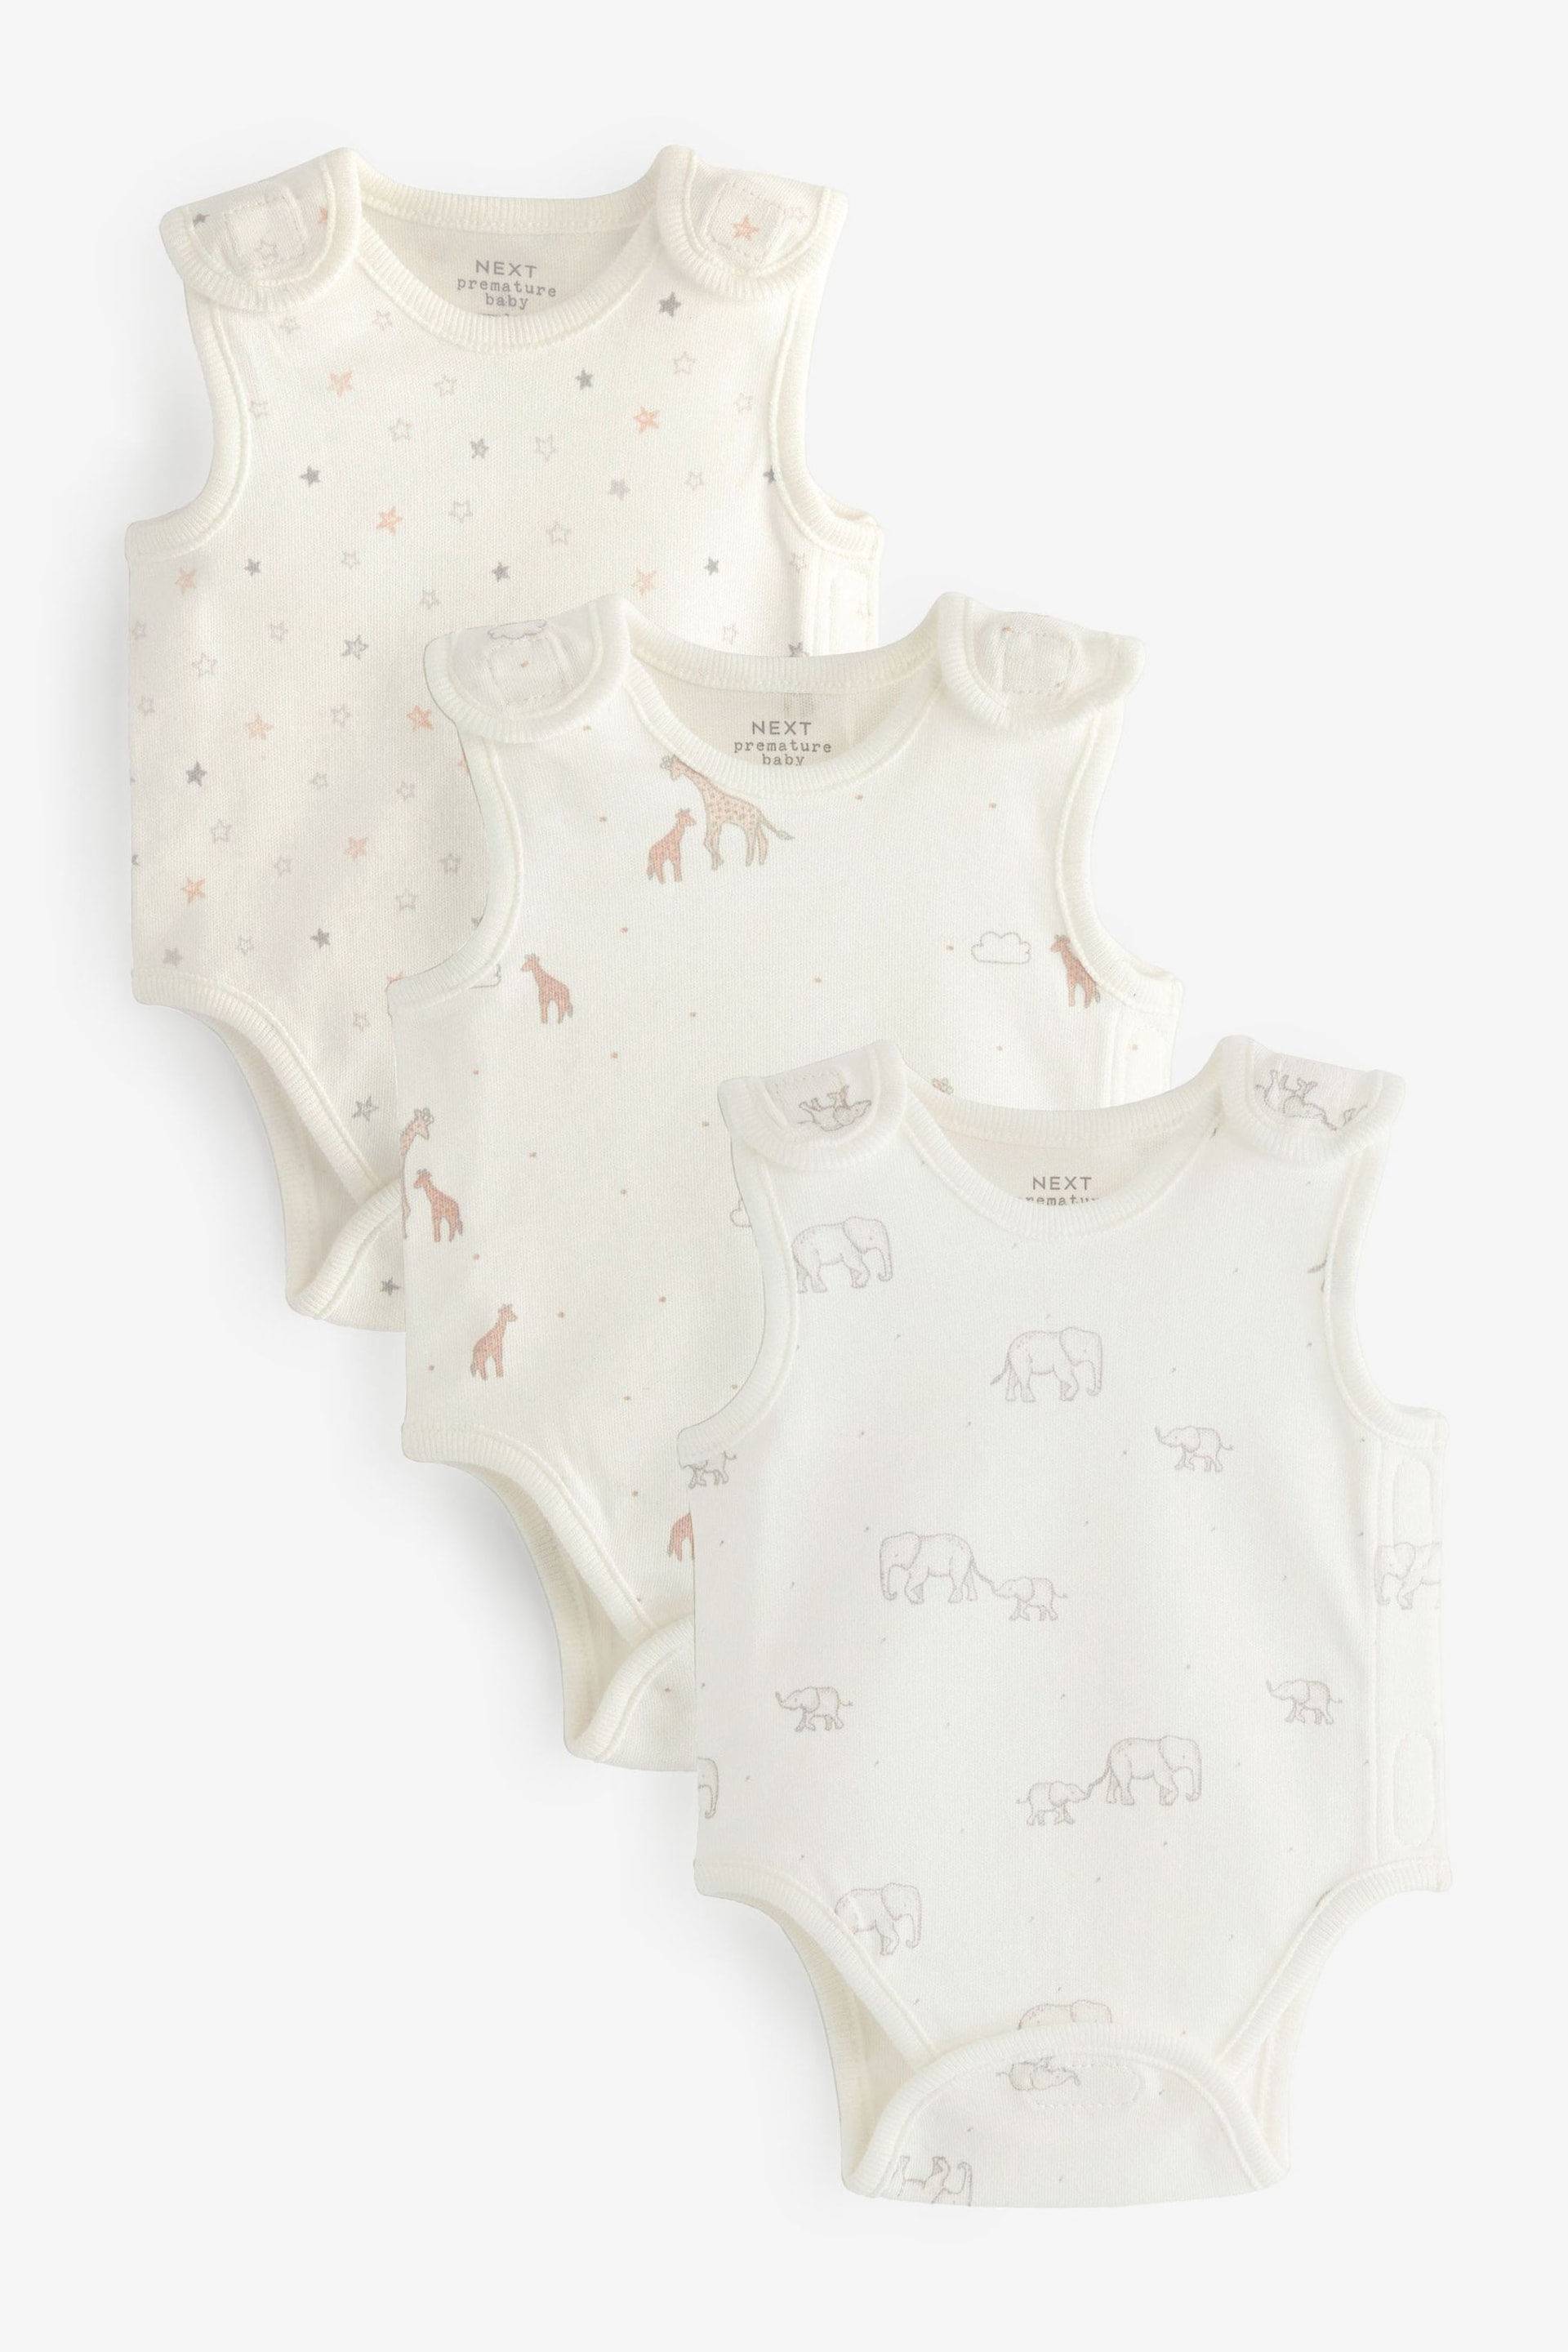 Neutral Character Premature Baby Bodysuits 3 Pack - Image 1 of 6